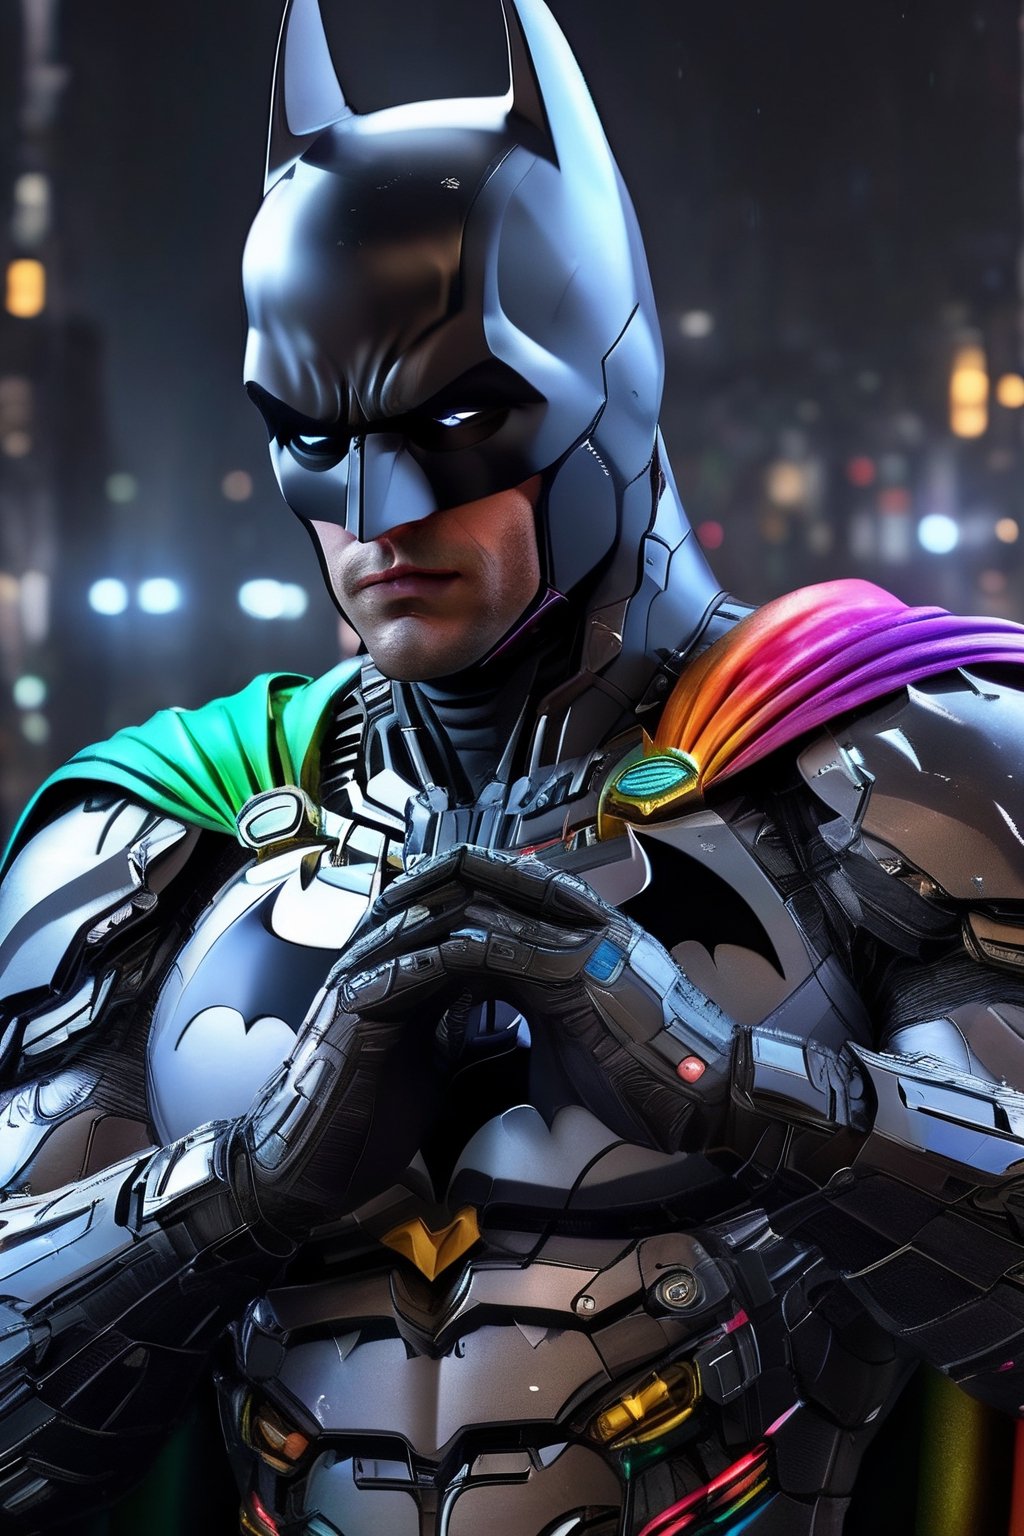 ((batman wearing 10 rings of each rainbow colour on his fingers)), ((batman wearing rainbow suit)), ((holding his hands up palms towards him to show the rings)), futuristic suit, high tech suit, realistic, detailed, ultra detailed realistic illustration, ultra high definition, 8k, unreal engine 5, ultra sharp focus, highly detailed, vibrant, cinematic production character rendering, very high quality model, hyper detailed photography, ultra detailed, detailed face, detailed eyes, realistic, detailed, ultra detailed realistic illustration, detailed face,foreground,moonlight reflection,cyborg style,Movie Still,cyborg,android,Film Still